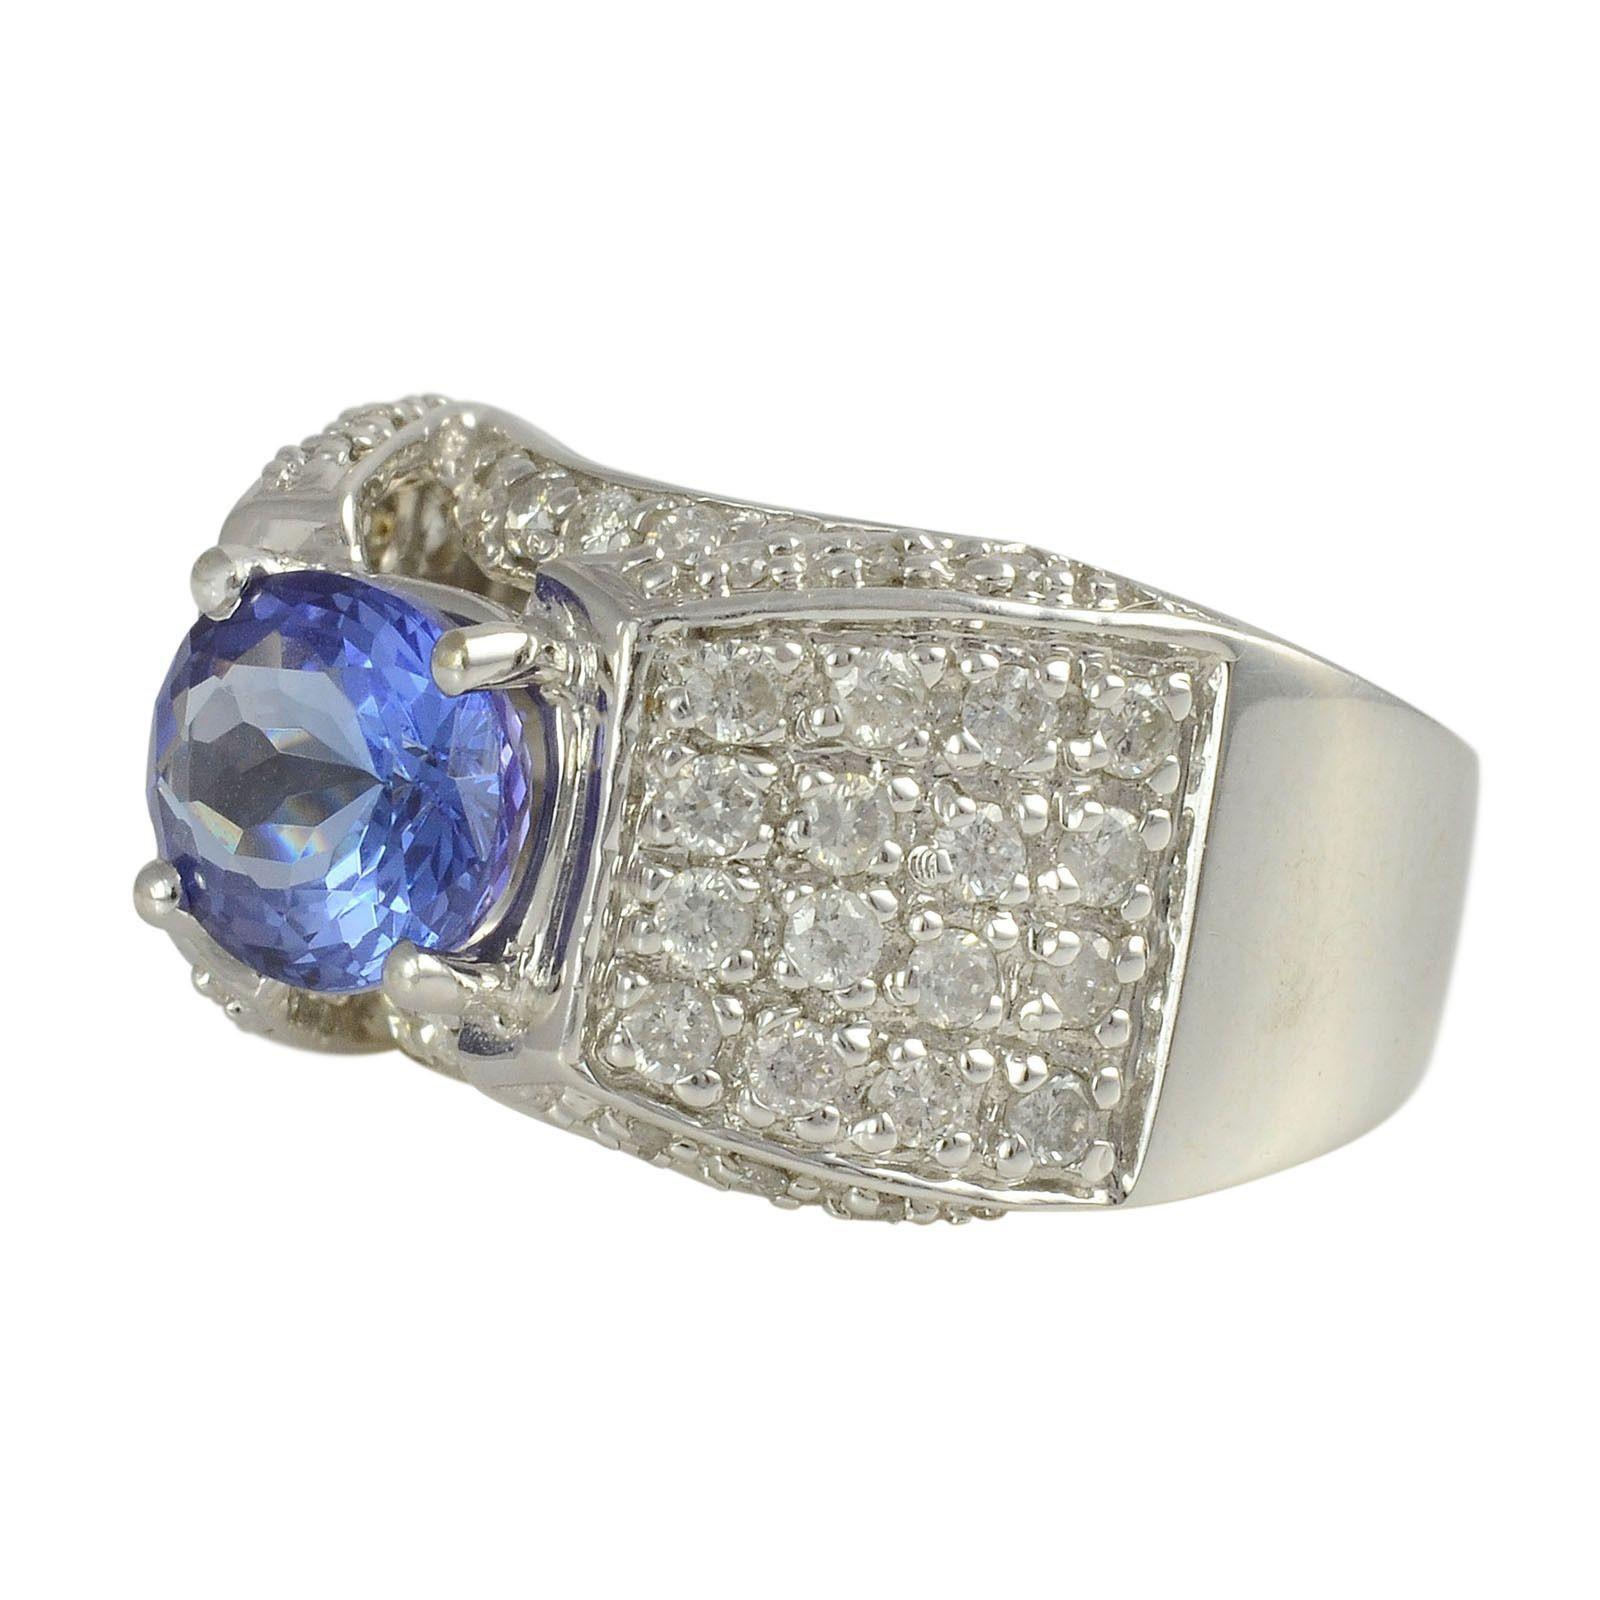 Estate 2.35 carat tanzanite ring with diamonds. The ring is set in 14 karat white gold with a 2.35 carat oval tanzanite and 54 diamonds at 1.10 carat total weight SI1-2 clarity I-J color, marked RRJ. Size 6.25. Appraised at $4,300. [SJ SAUC3094 P]